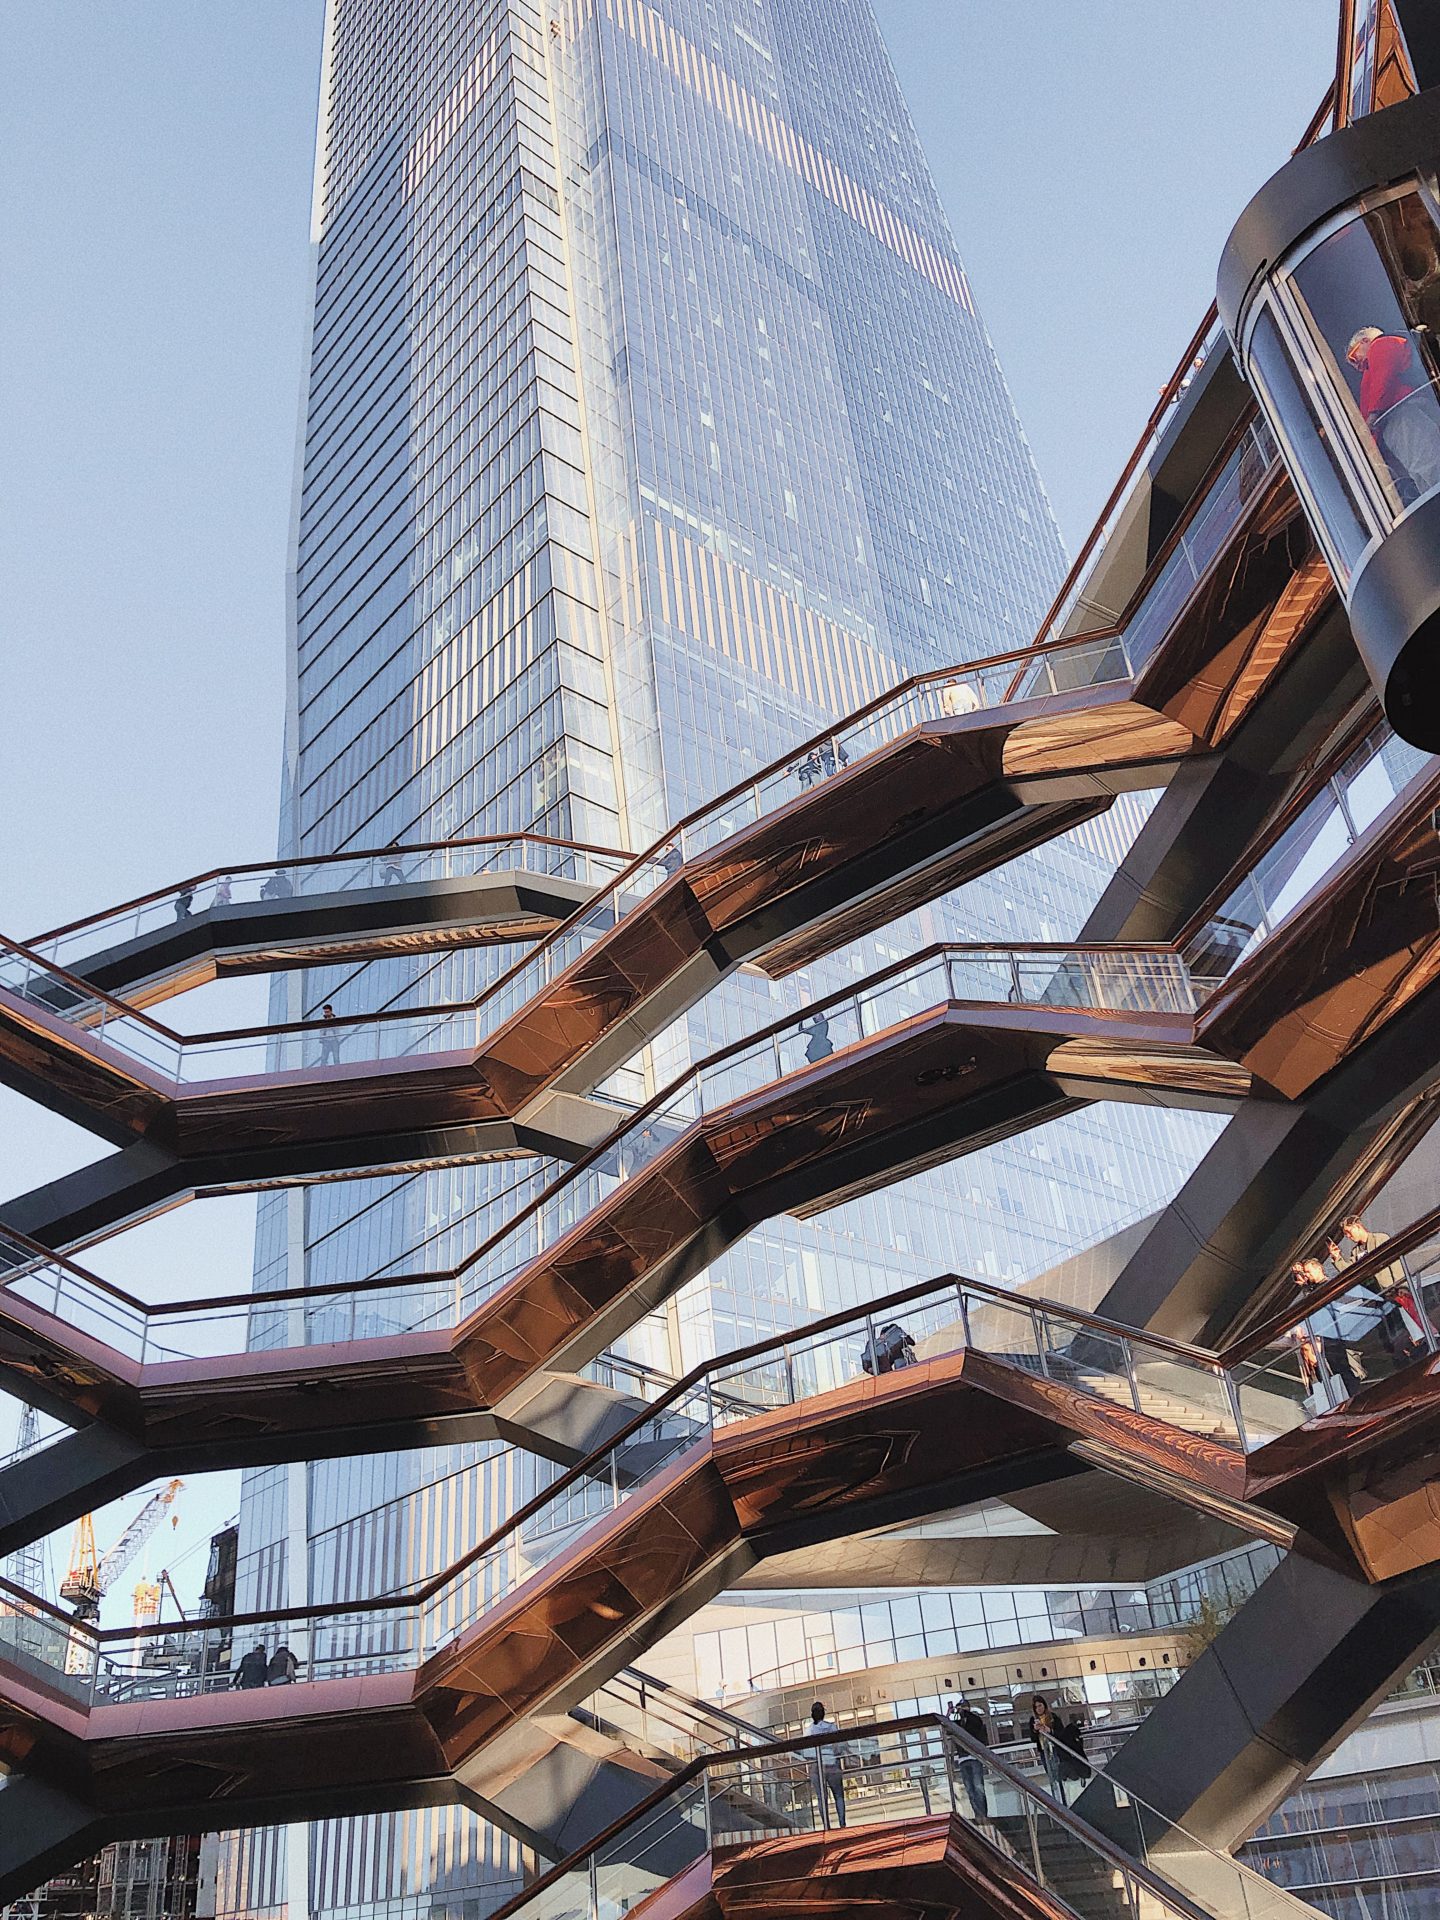 The view of the Vessel in Hudson Yards at New York City